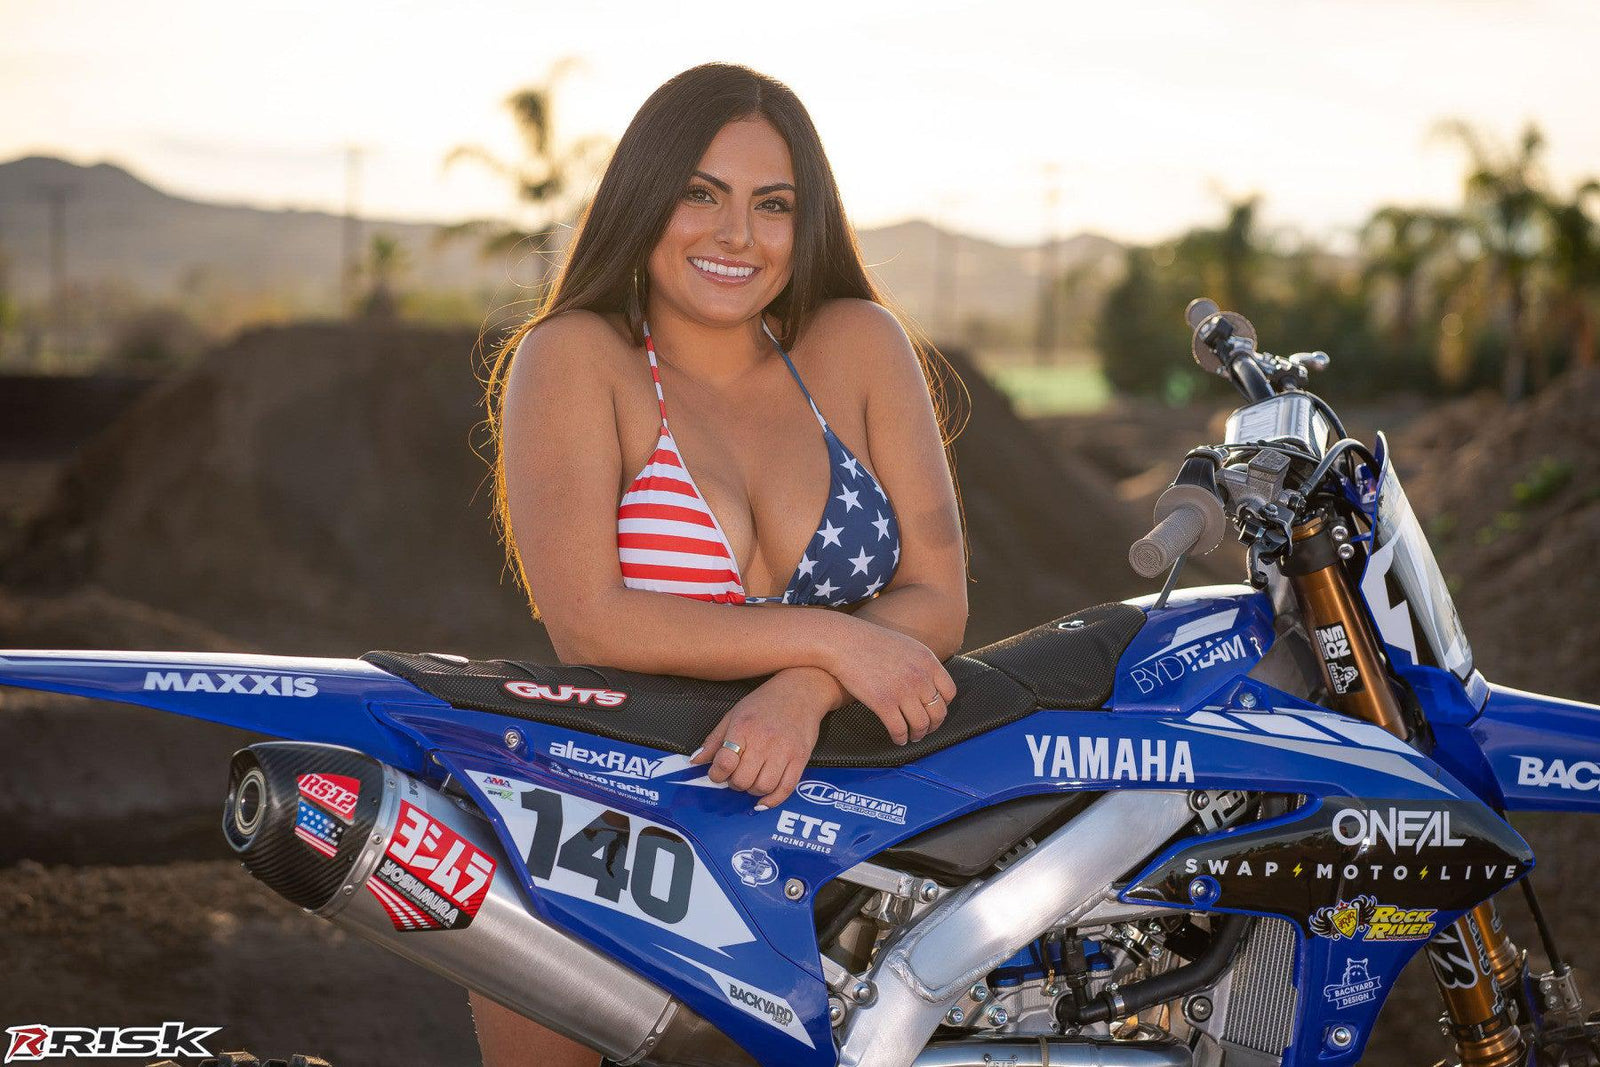 December's Risk Racing Moto Model Kelly Perez posing in various bikinis and Risk Racing Jerseys next to a dirt bike that's sitting on a Risk Racing ATS stand - Pose #11